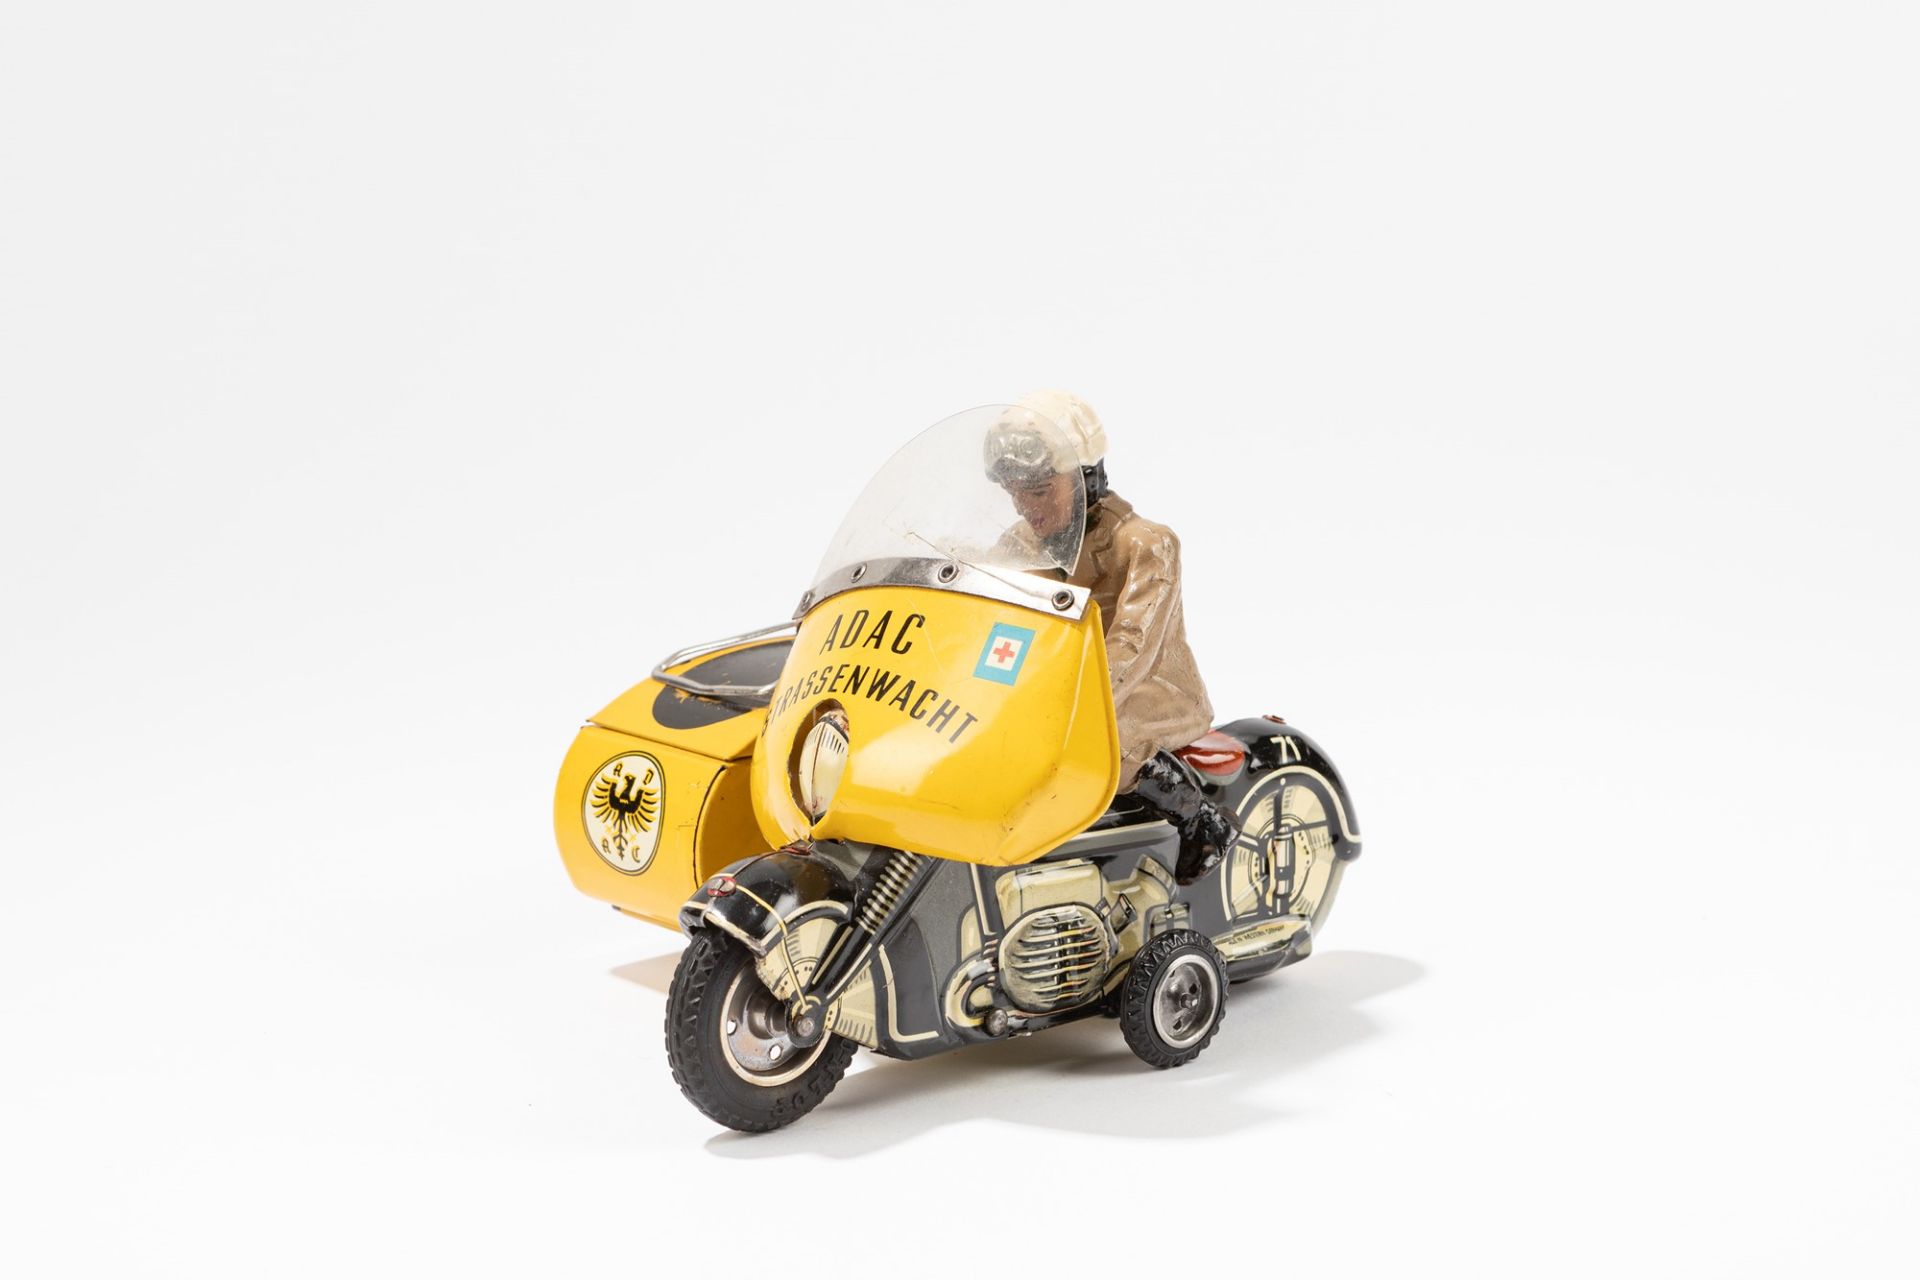 Gozo ADAC motorcycle with sidecar, 1950-1955